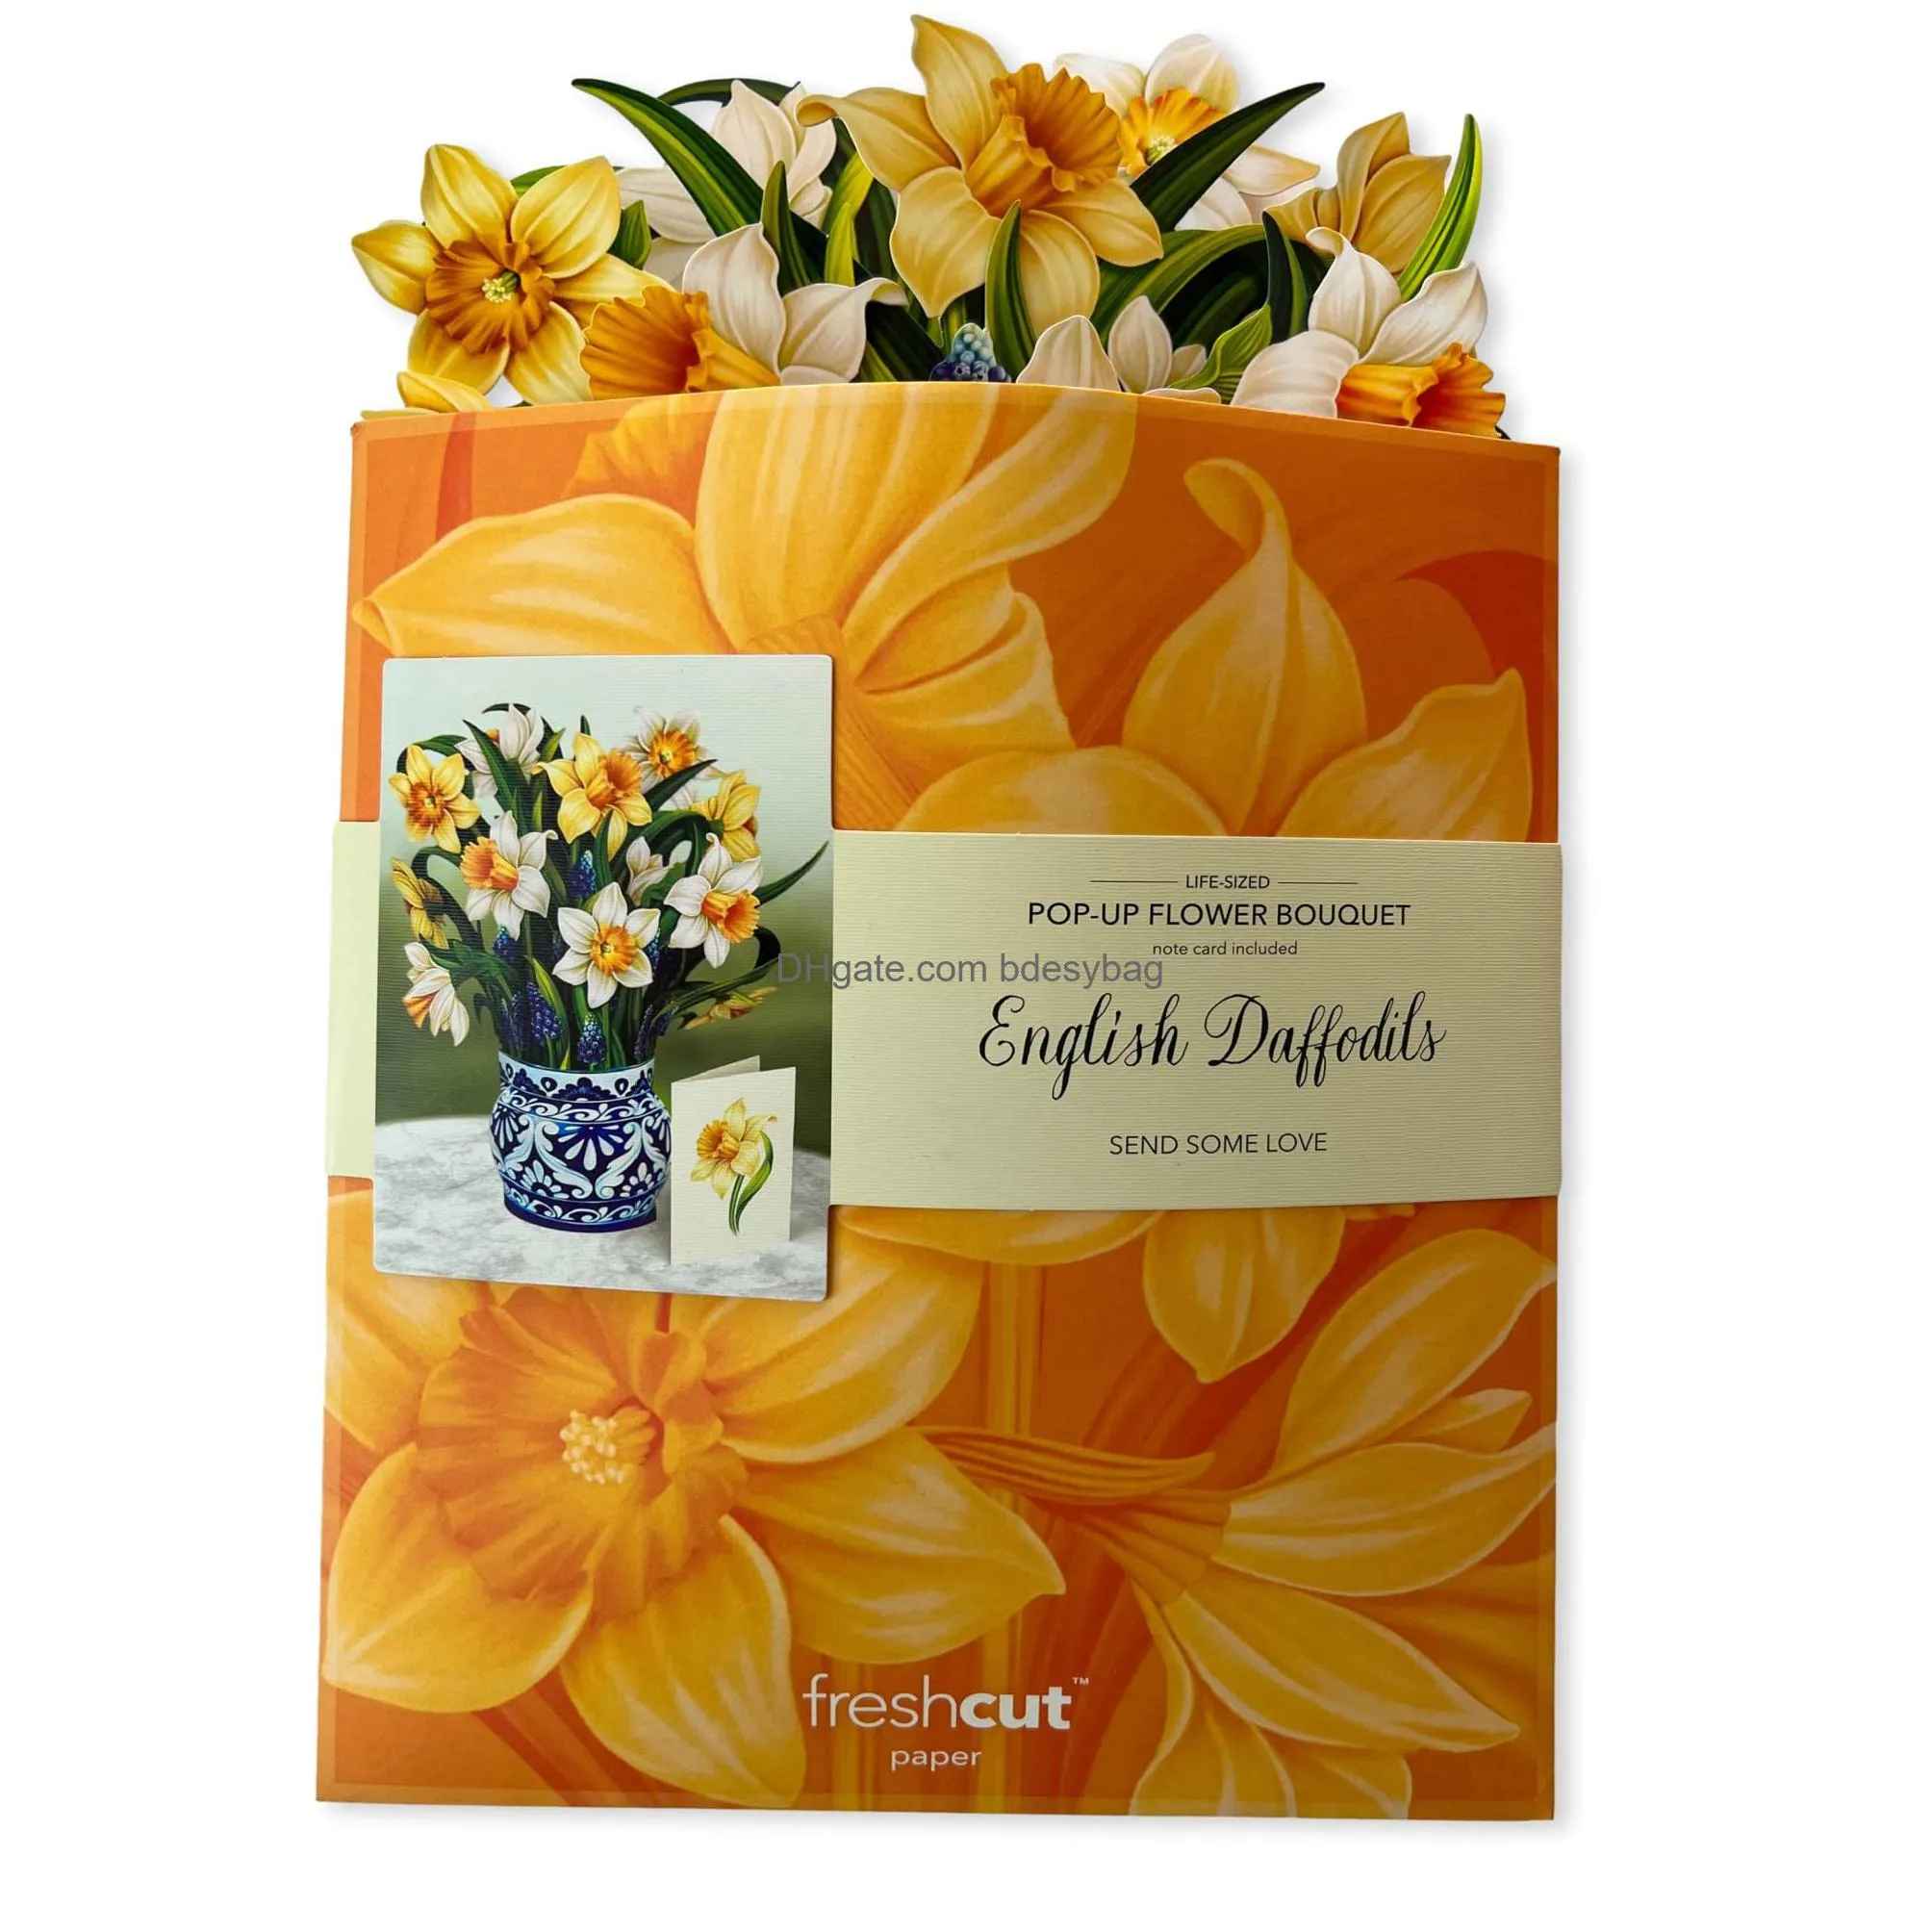  up cards english daffodils 12 inch life sized forever flower bouquet 3d popup greeting cards with note card and envelope